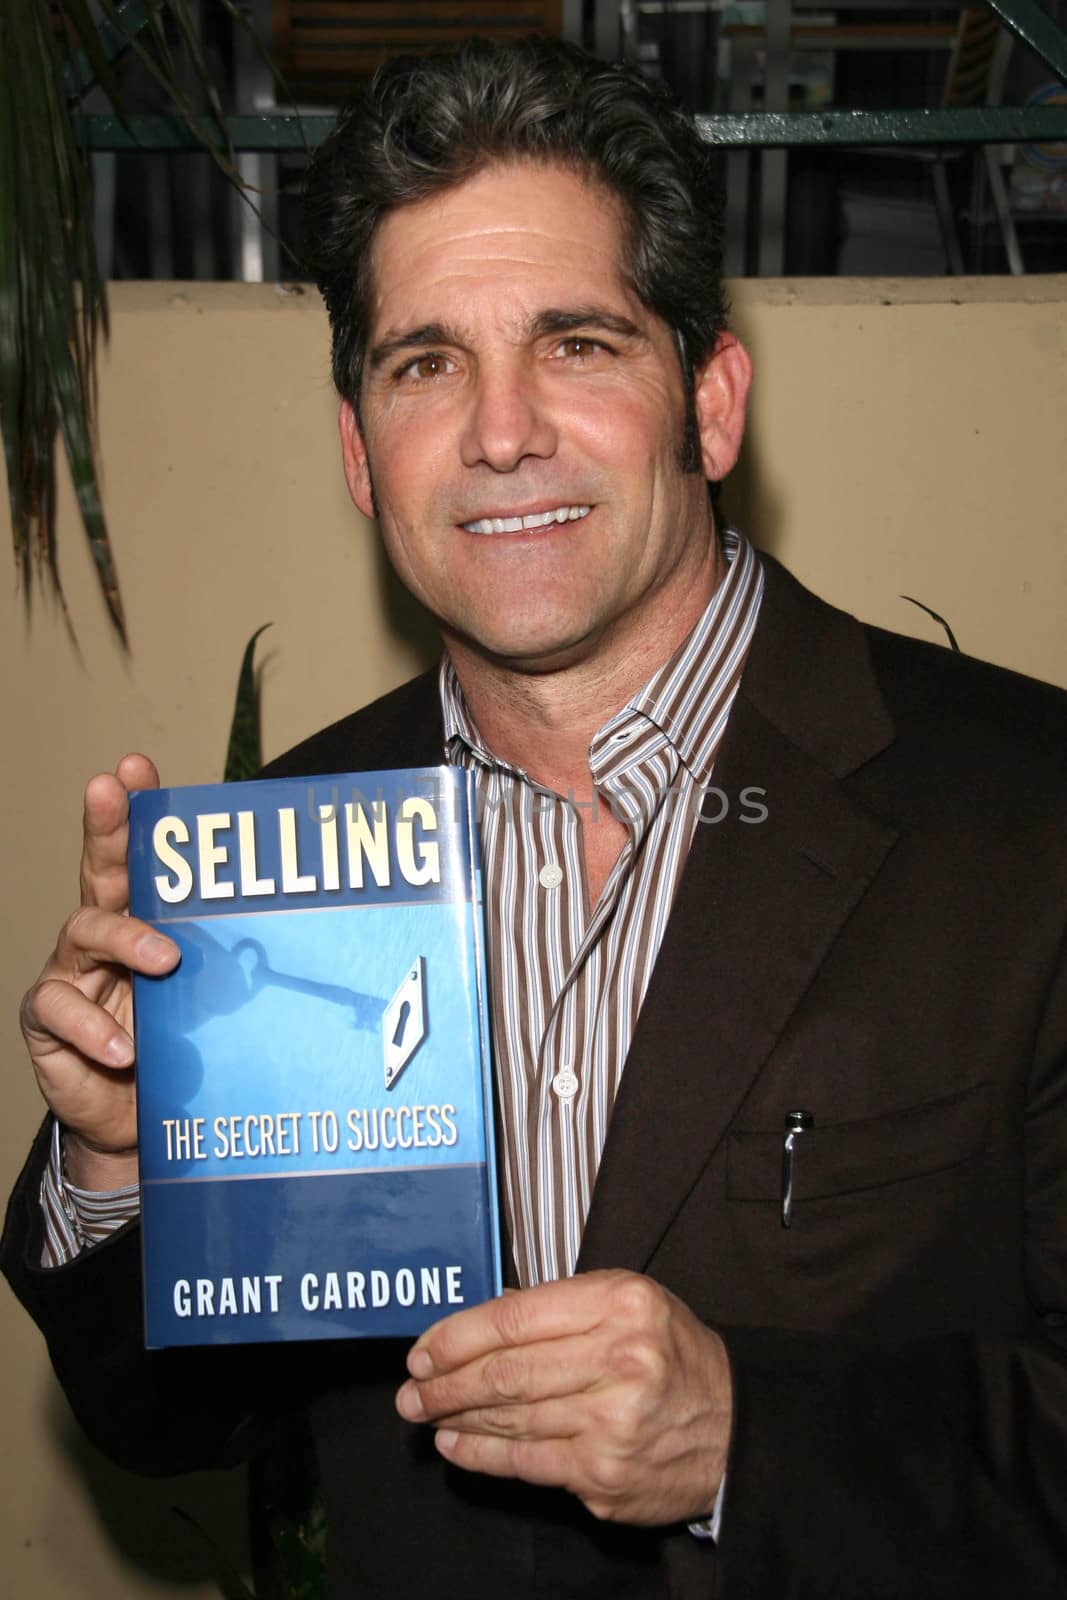 Grant Cardone at the Launch party for "Starring...!" Fragrances and "Charmed" Jewelry, benefitting Tree People. Whole Foods Lifestyle Store, Los Angeles, CA. 04-21-08